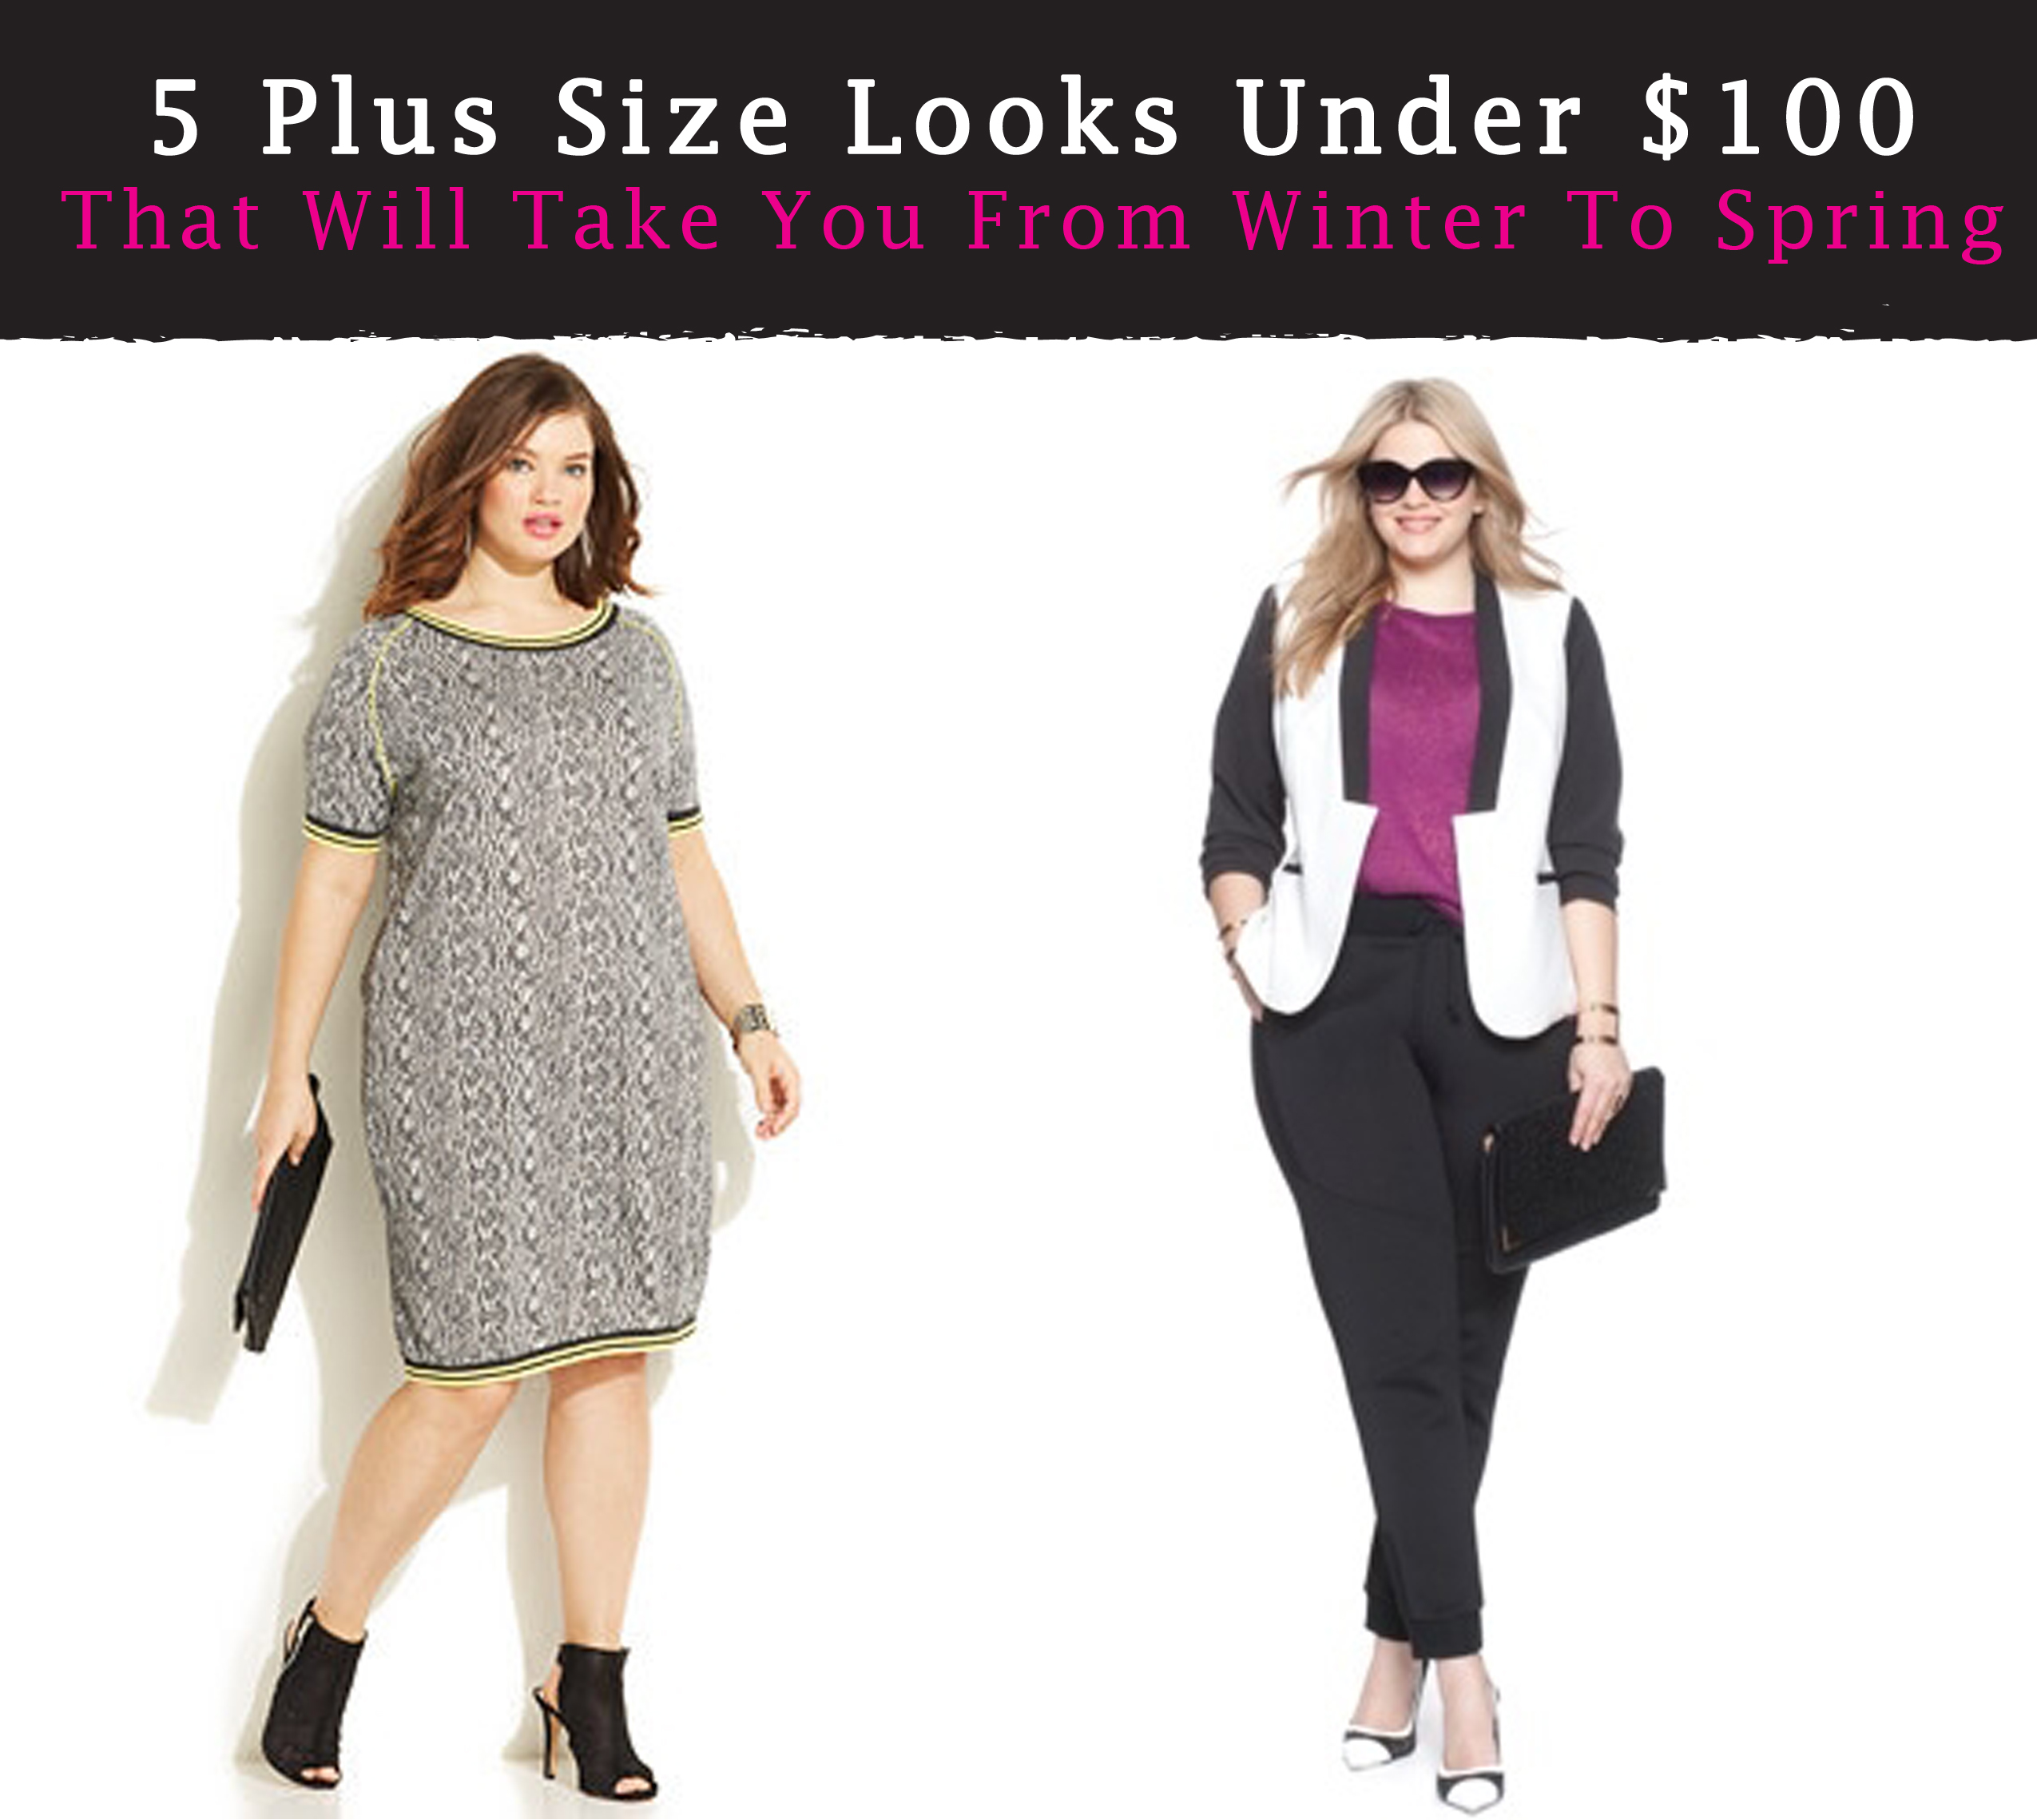 5 Plus Size Looks Under $100 That Will Take You From Winter To Spring ...